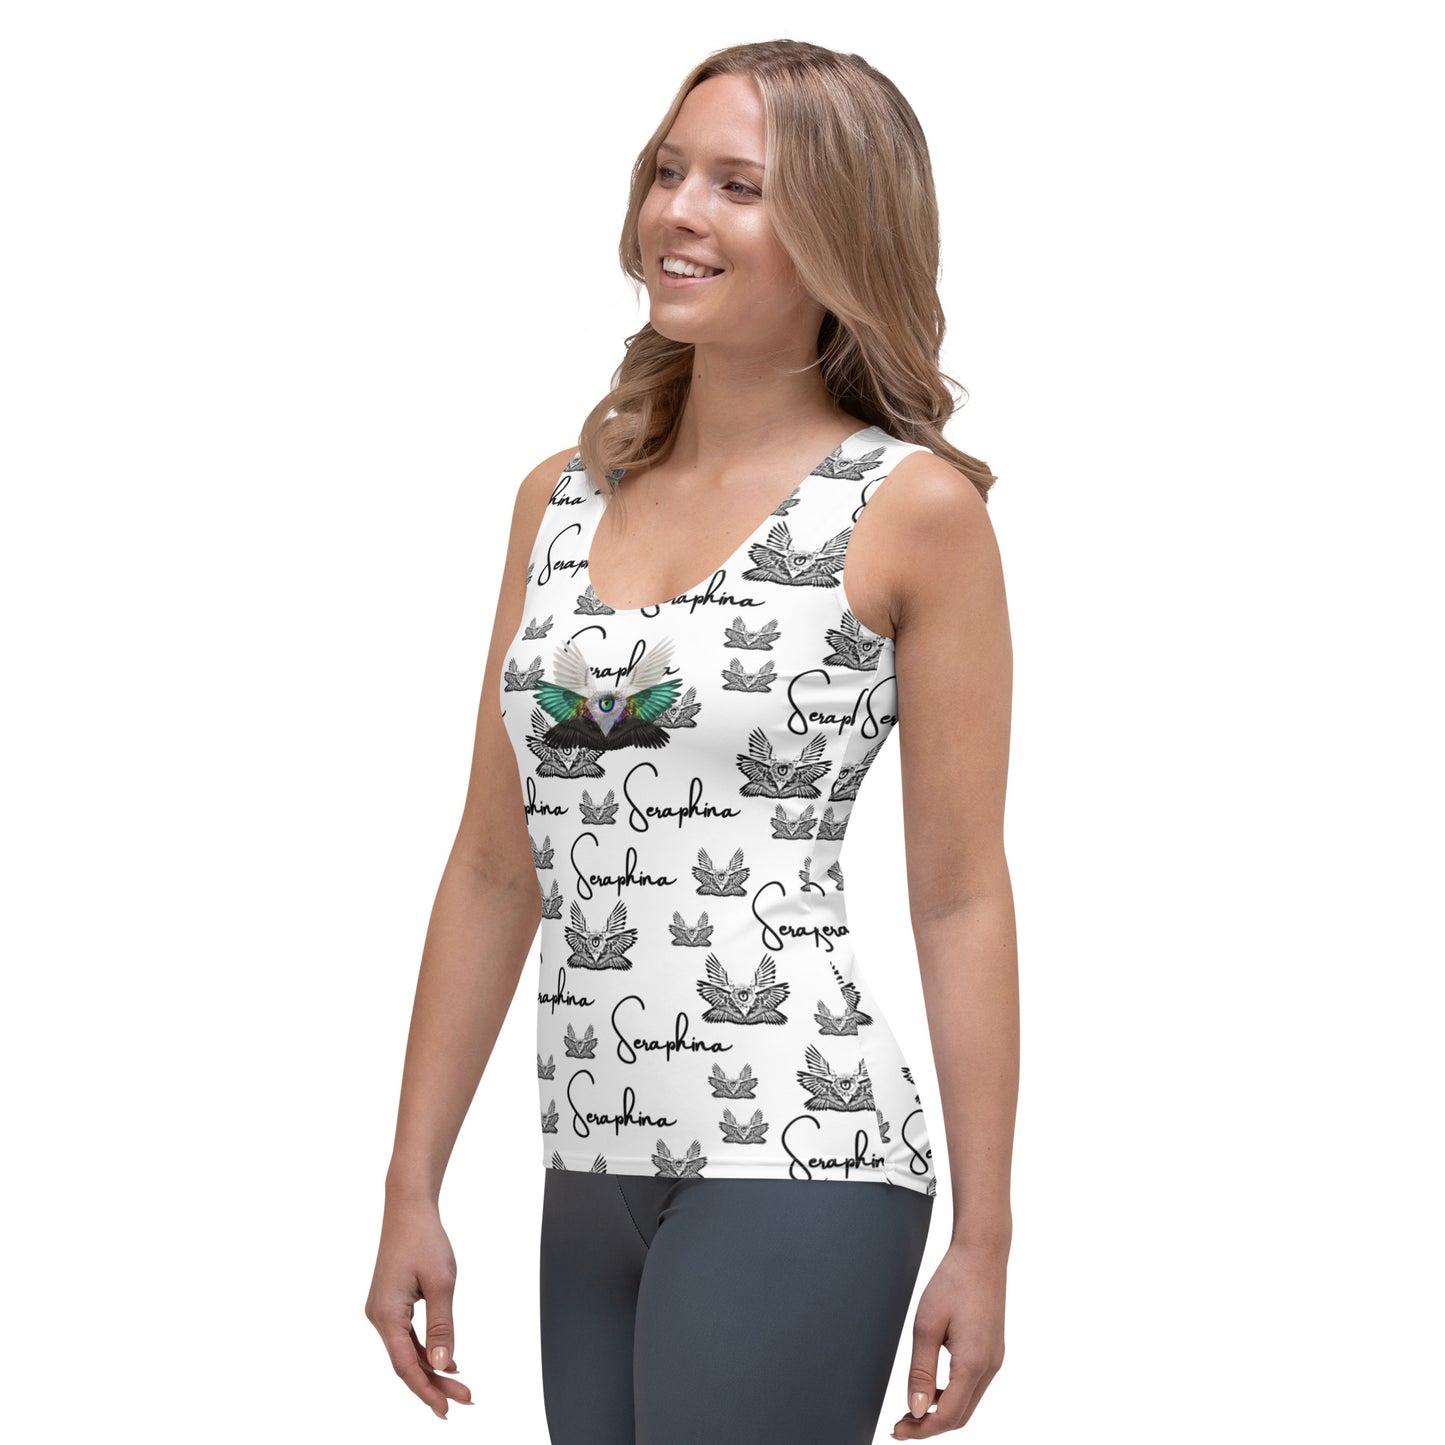 Designed-For-You Tank Top